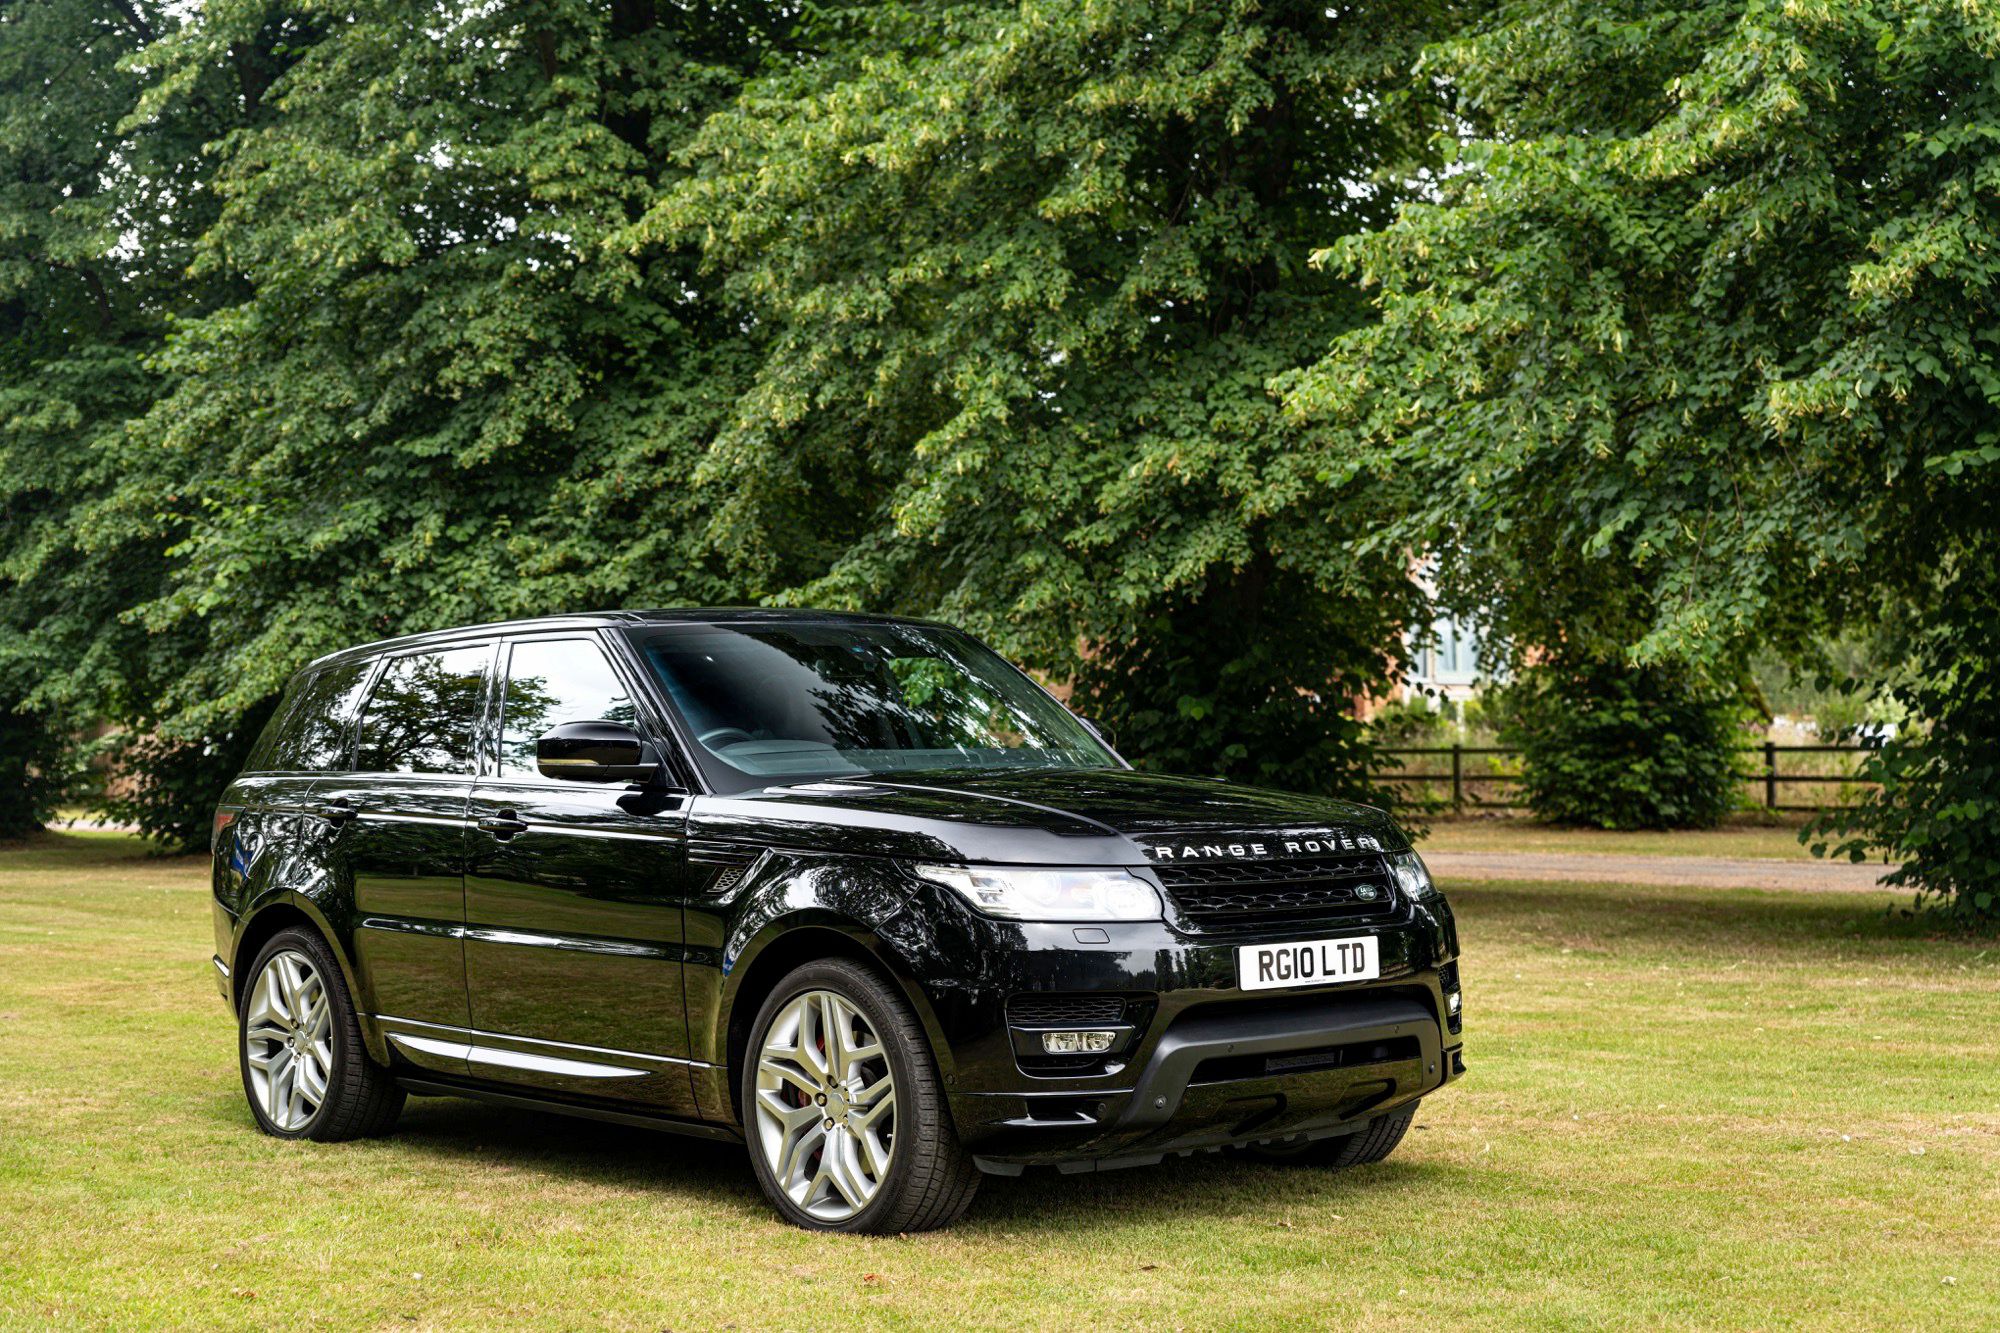 2015 (15) Range Rover Sport 5.0 V8 Supercharged Autobiography Dynamic